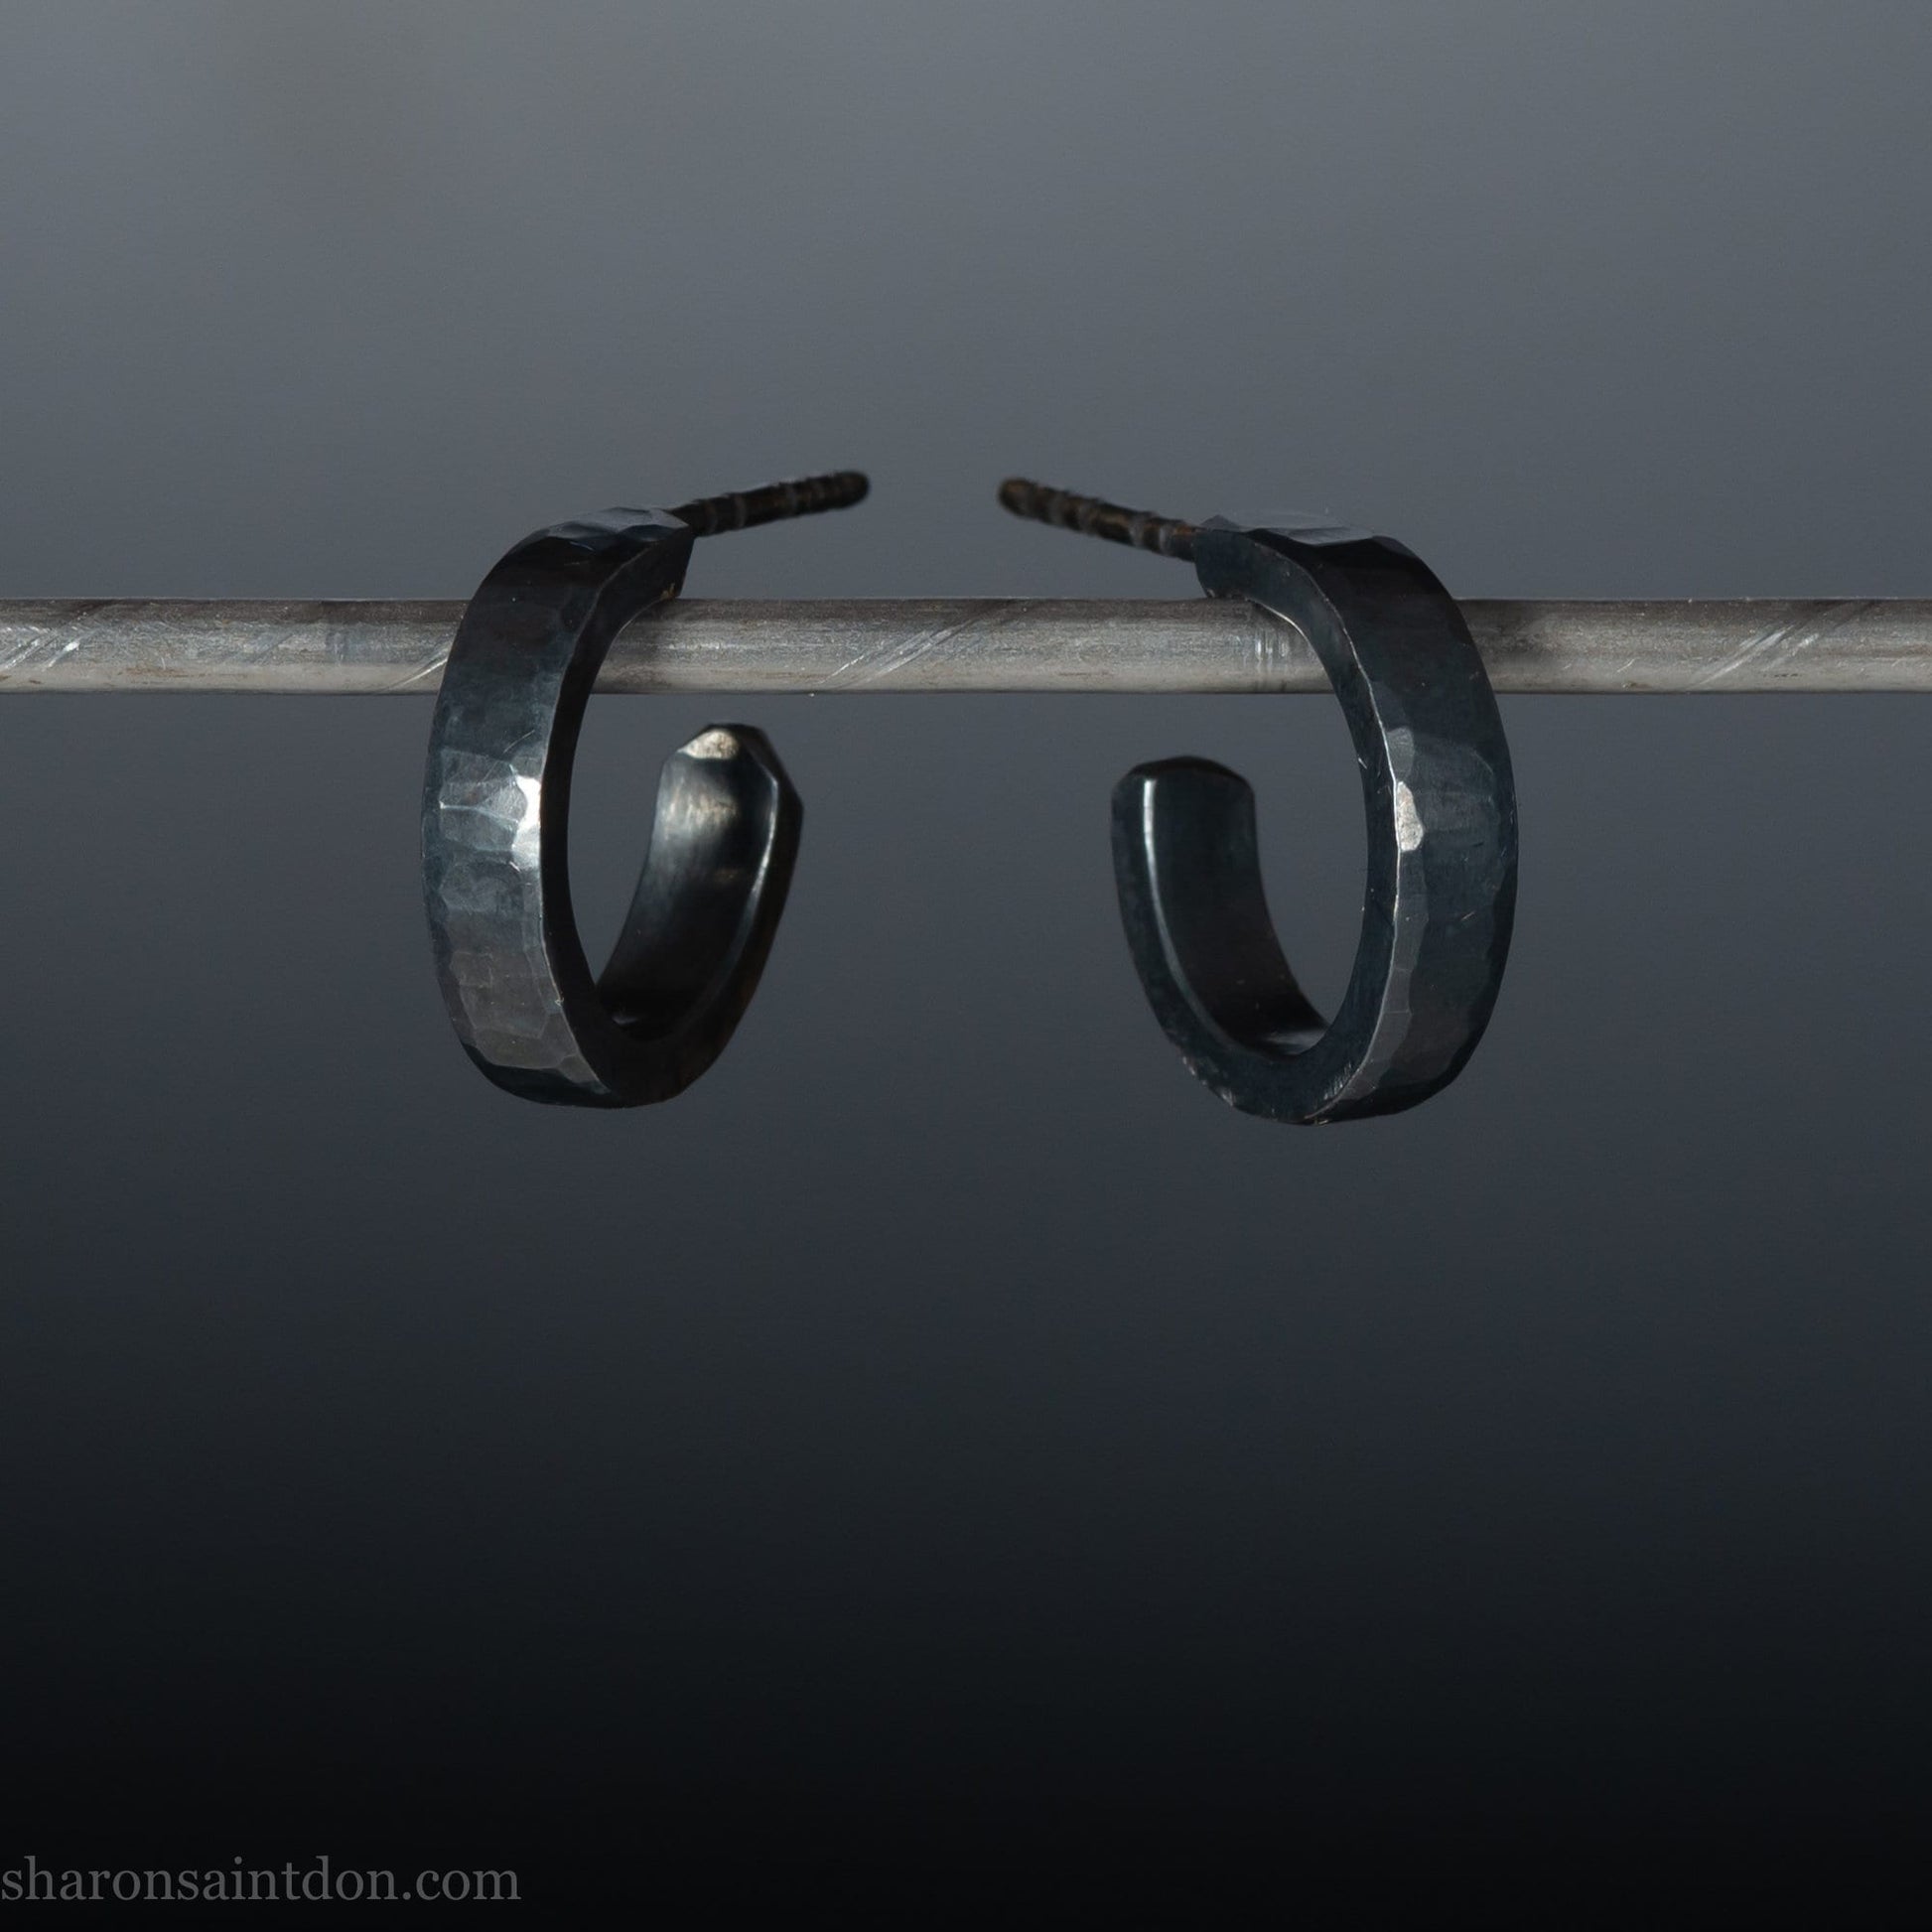 Handmade 925 sterling silver hoop earrings for men or women. 16mm x 3mm, round, oxidized black earrings with hammered texture, made by Sharon SaintDon in North America.